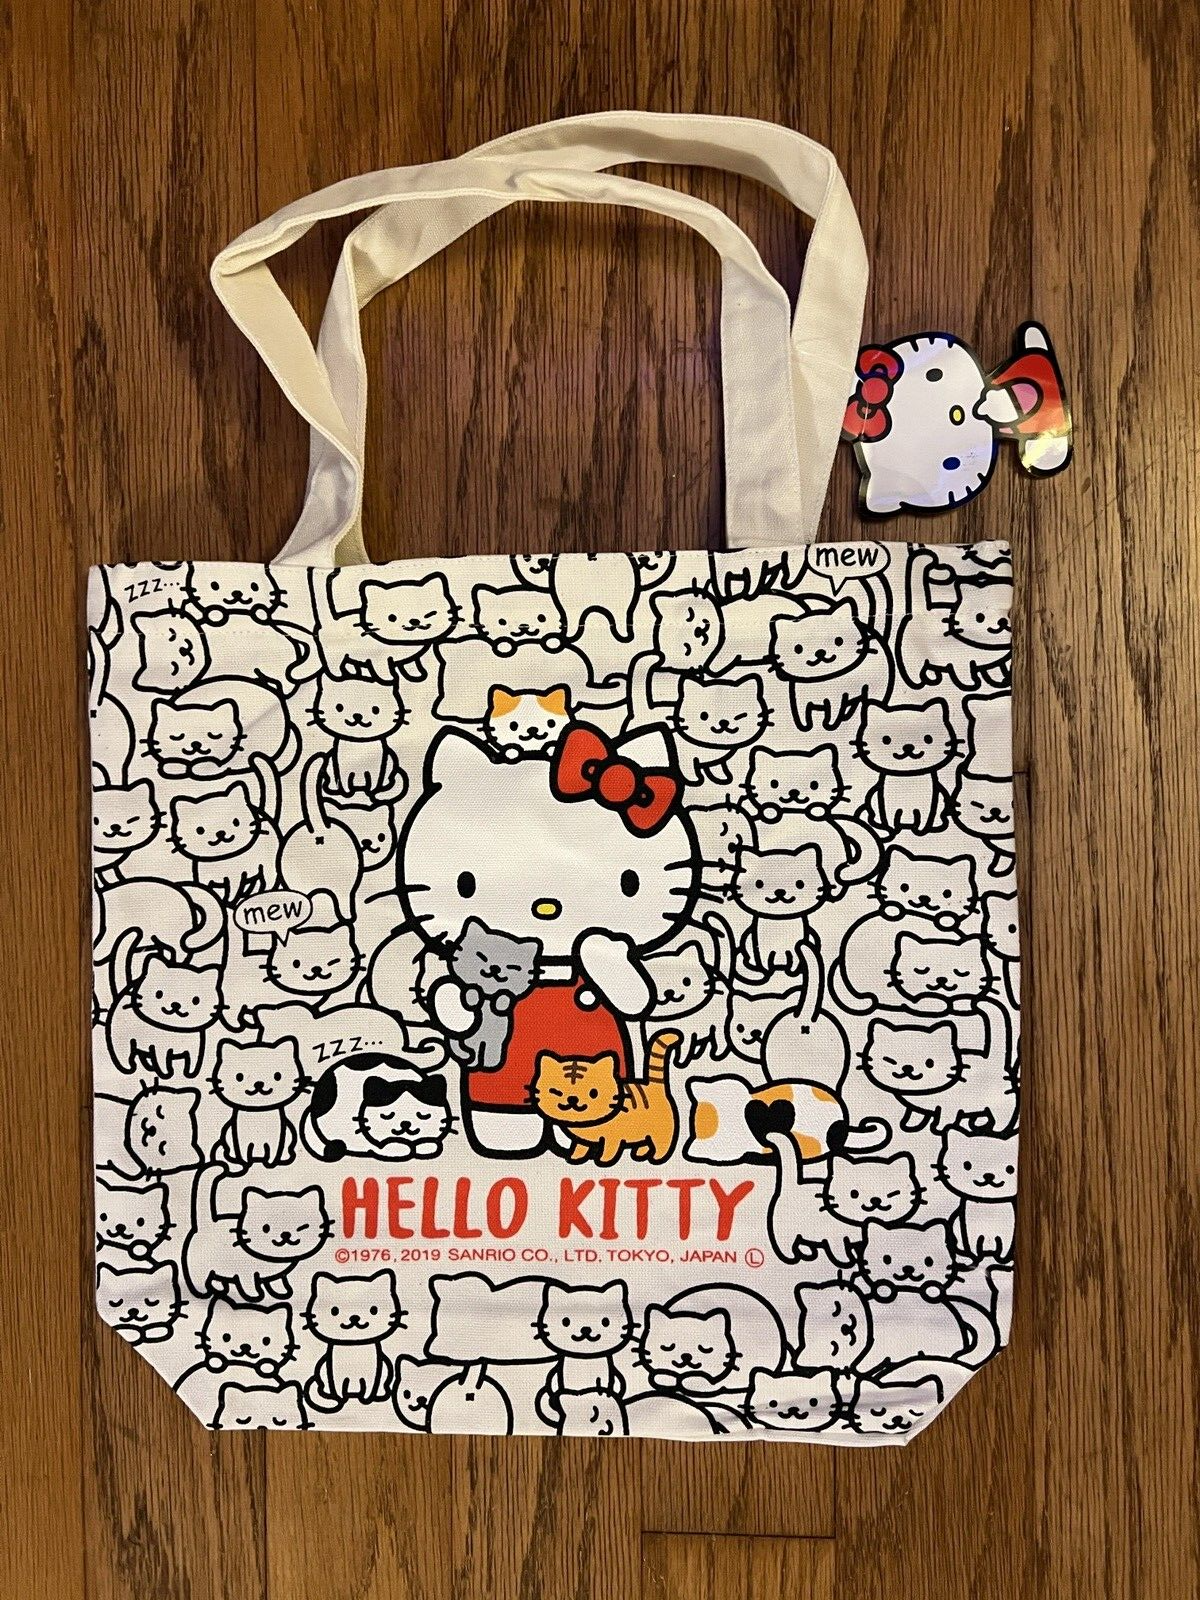 Sanrio Hell Kitty Backpack Cartoon Printed Canvas Bags For Women